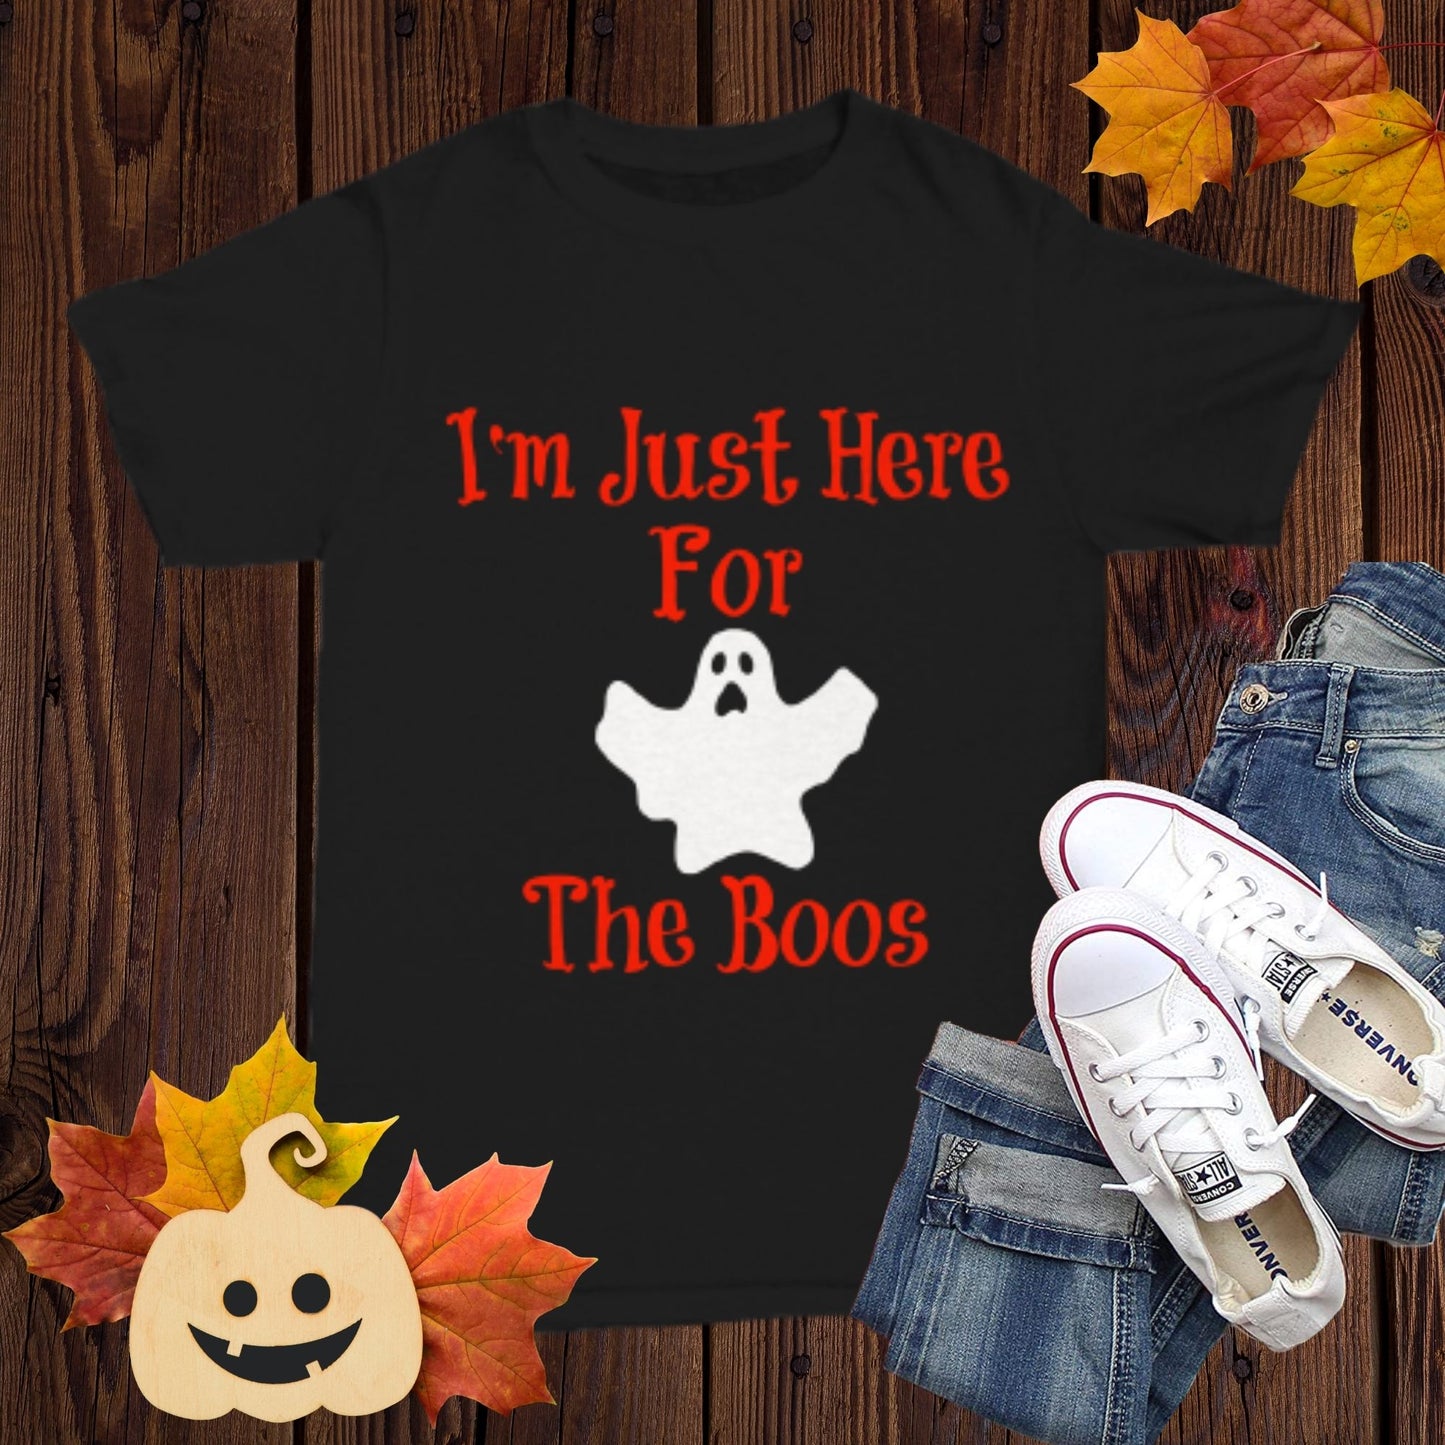 I'm Just Here For The Boos Black Novelty T-Shirt Halloween Gifts For Friends Custom Printed T-Shirts